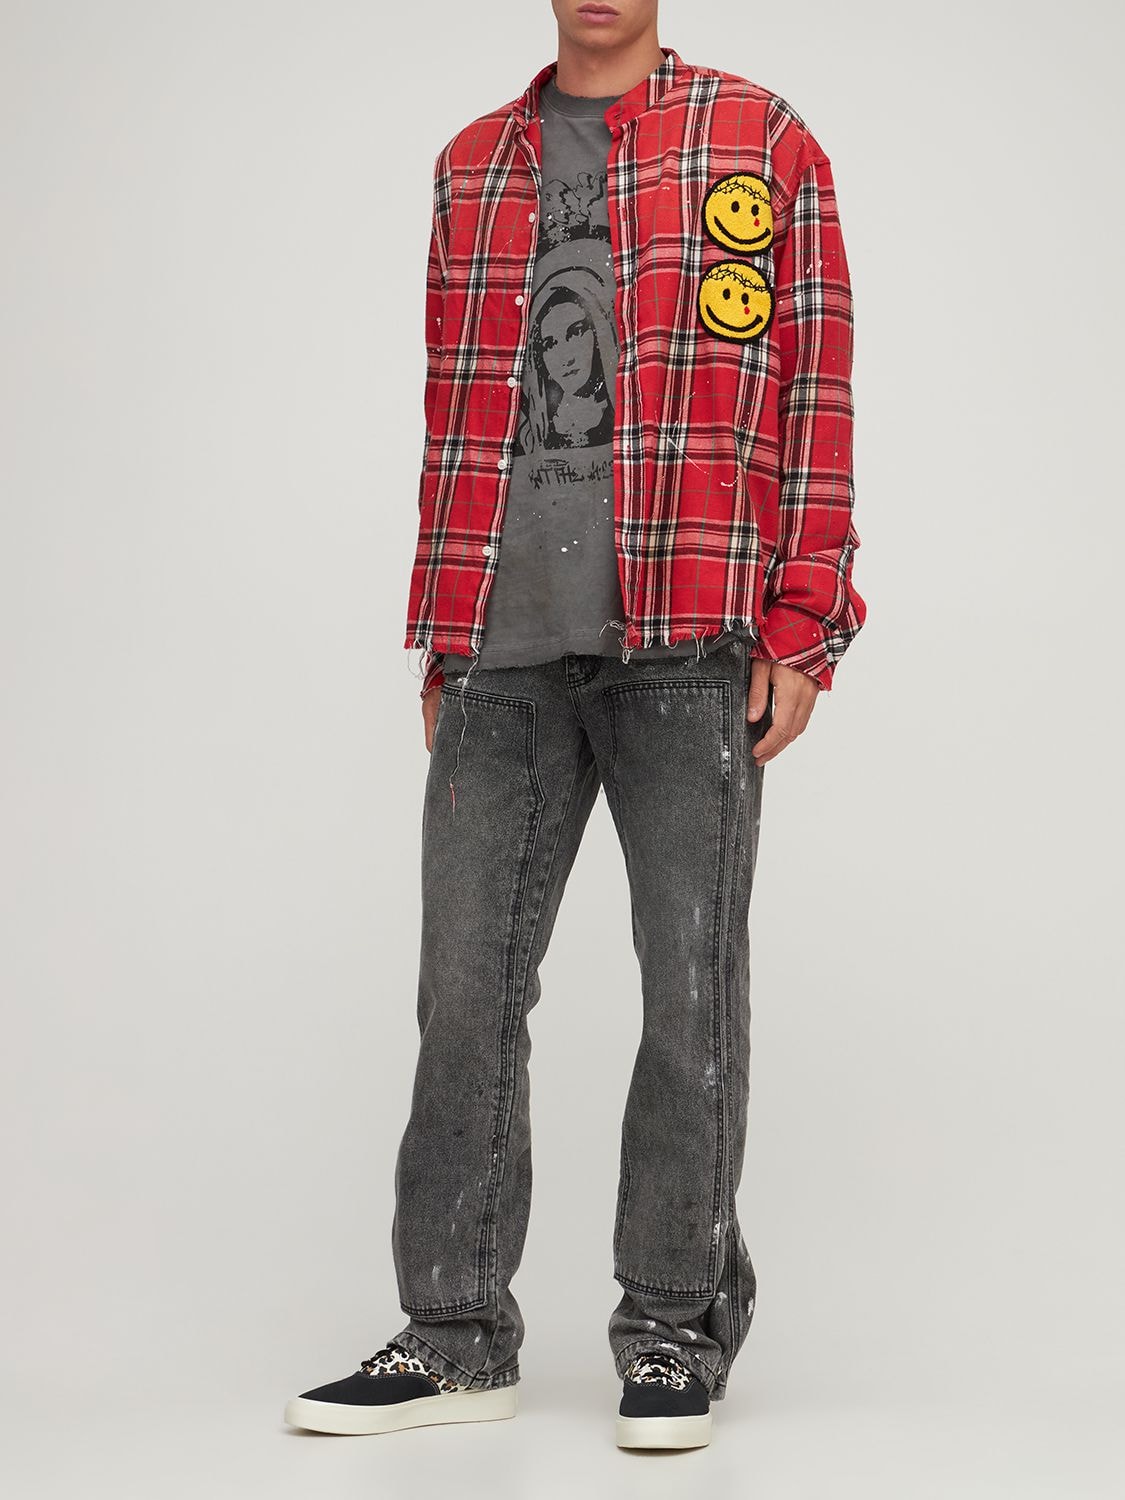 Someit K.o.k Ls Vintage Flannel Shirt in Red | Stylemi